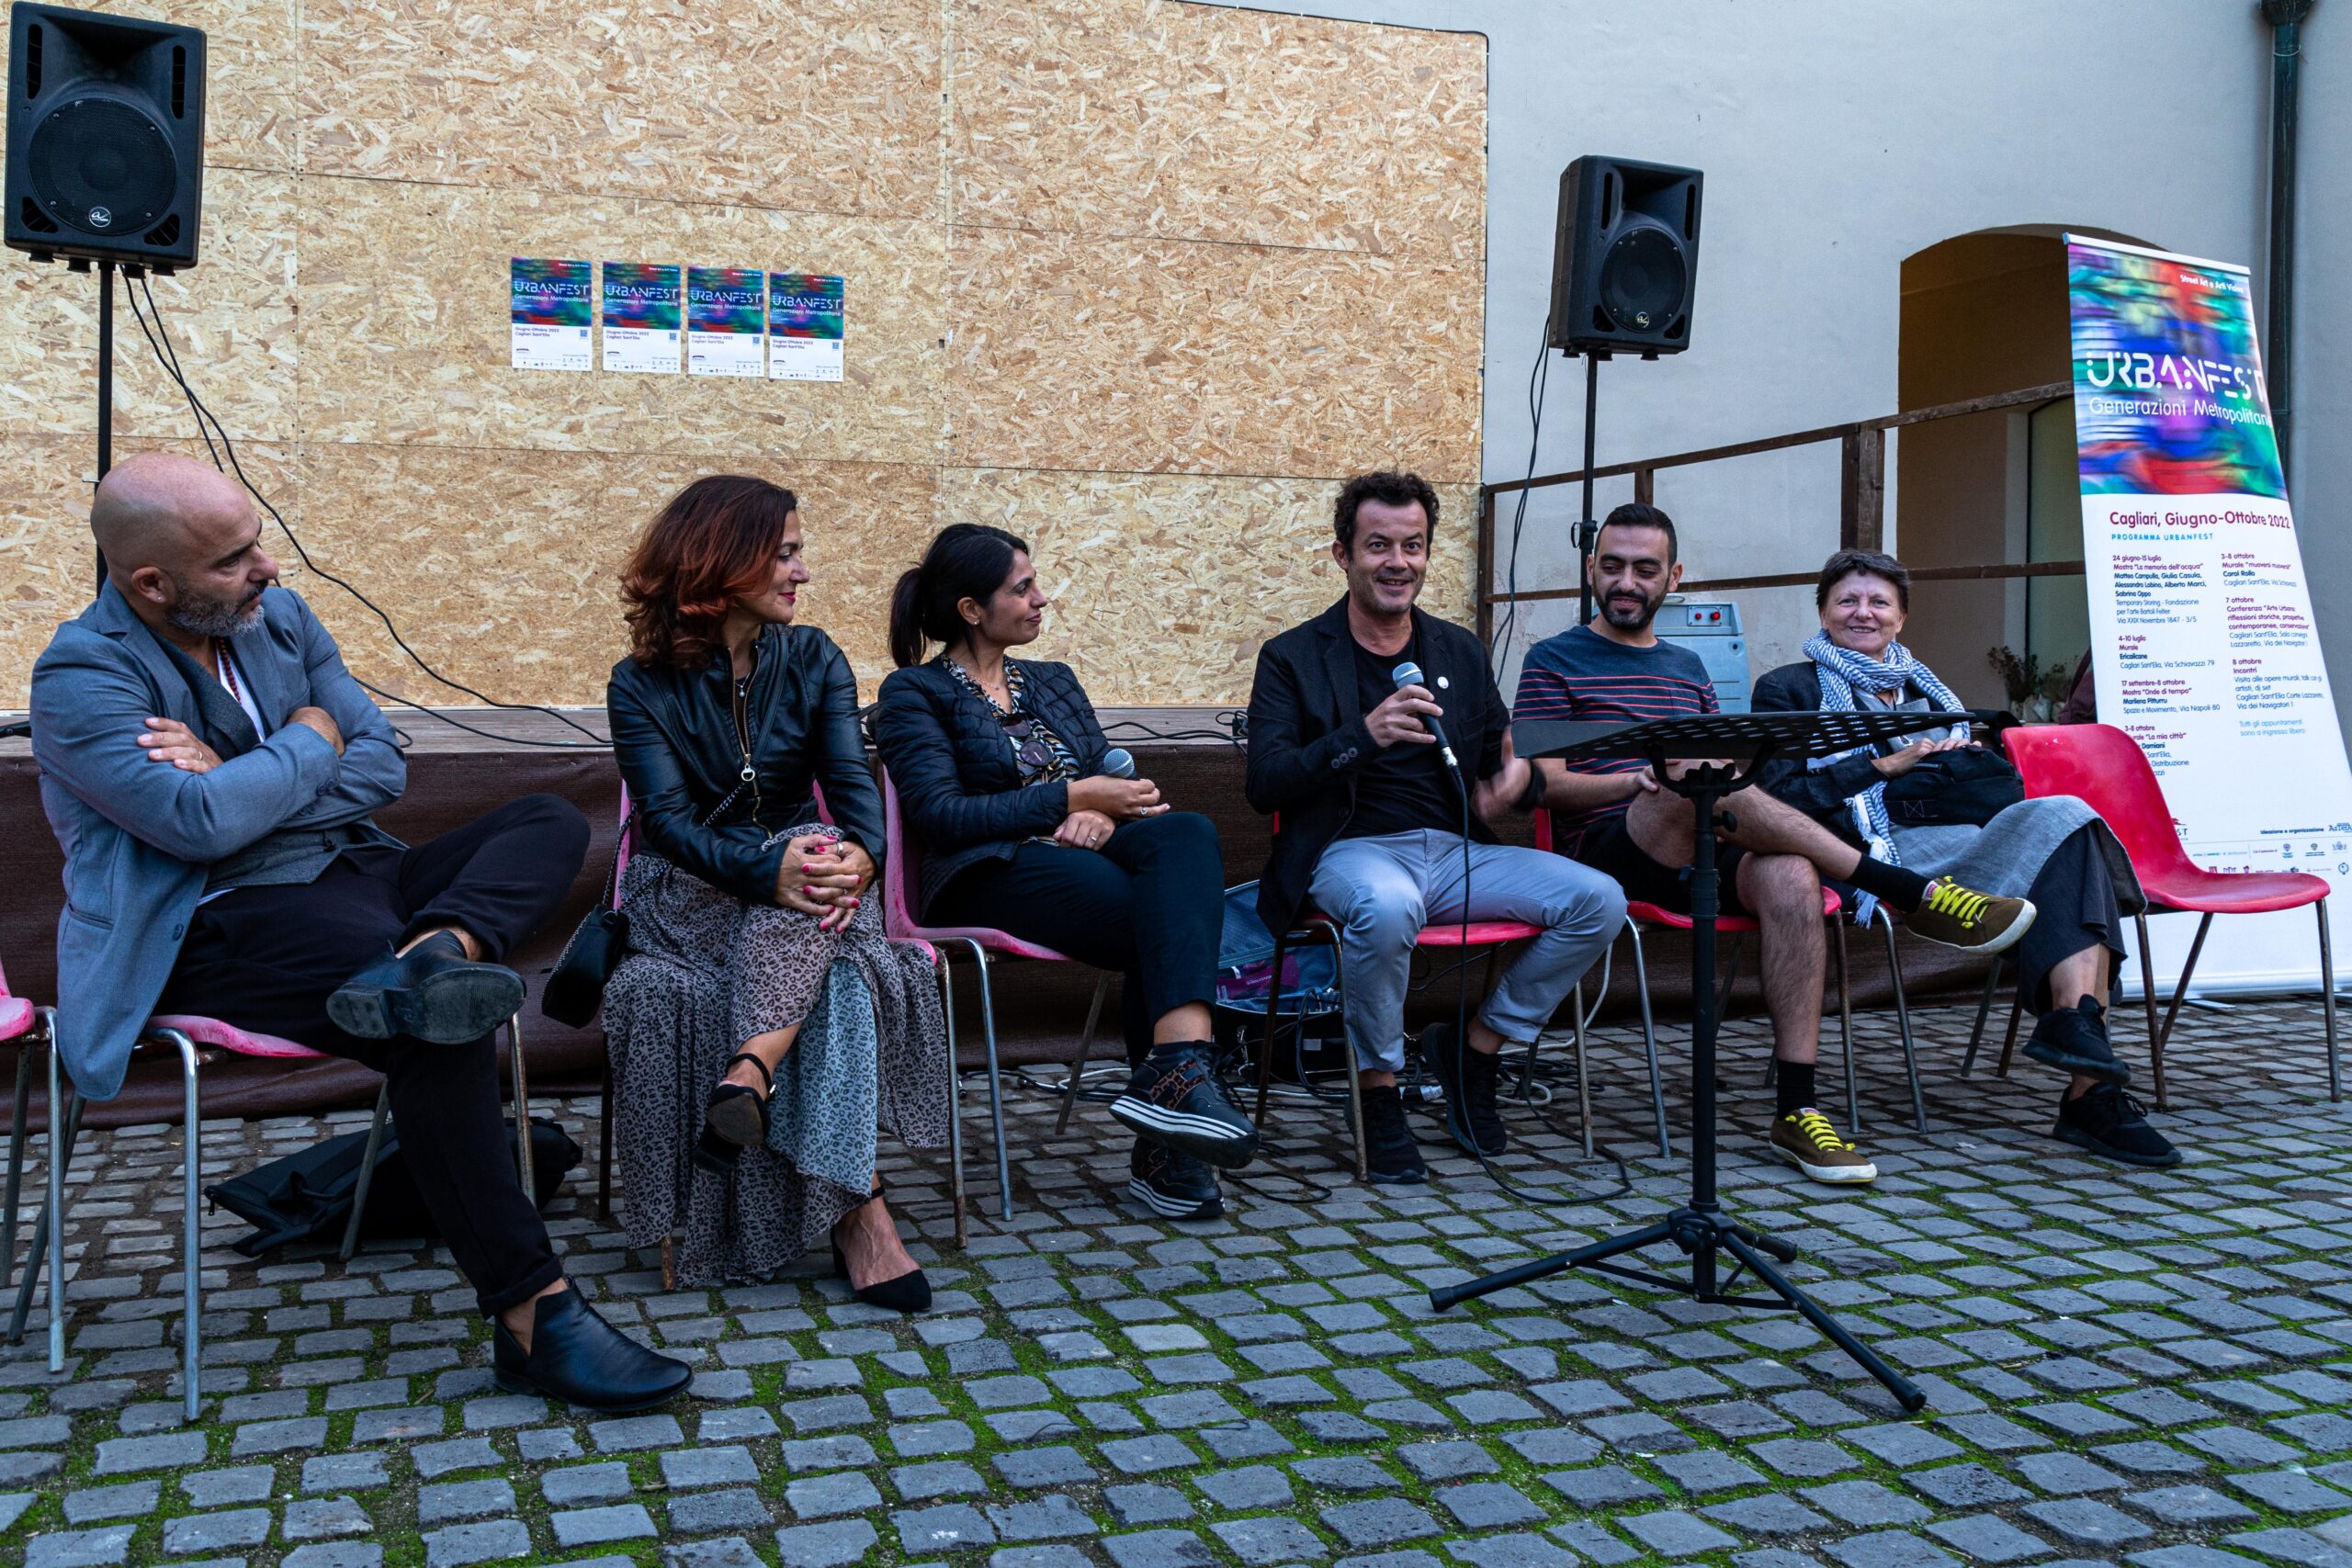 Artists talk hosted by Marco Peri